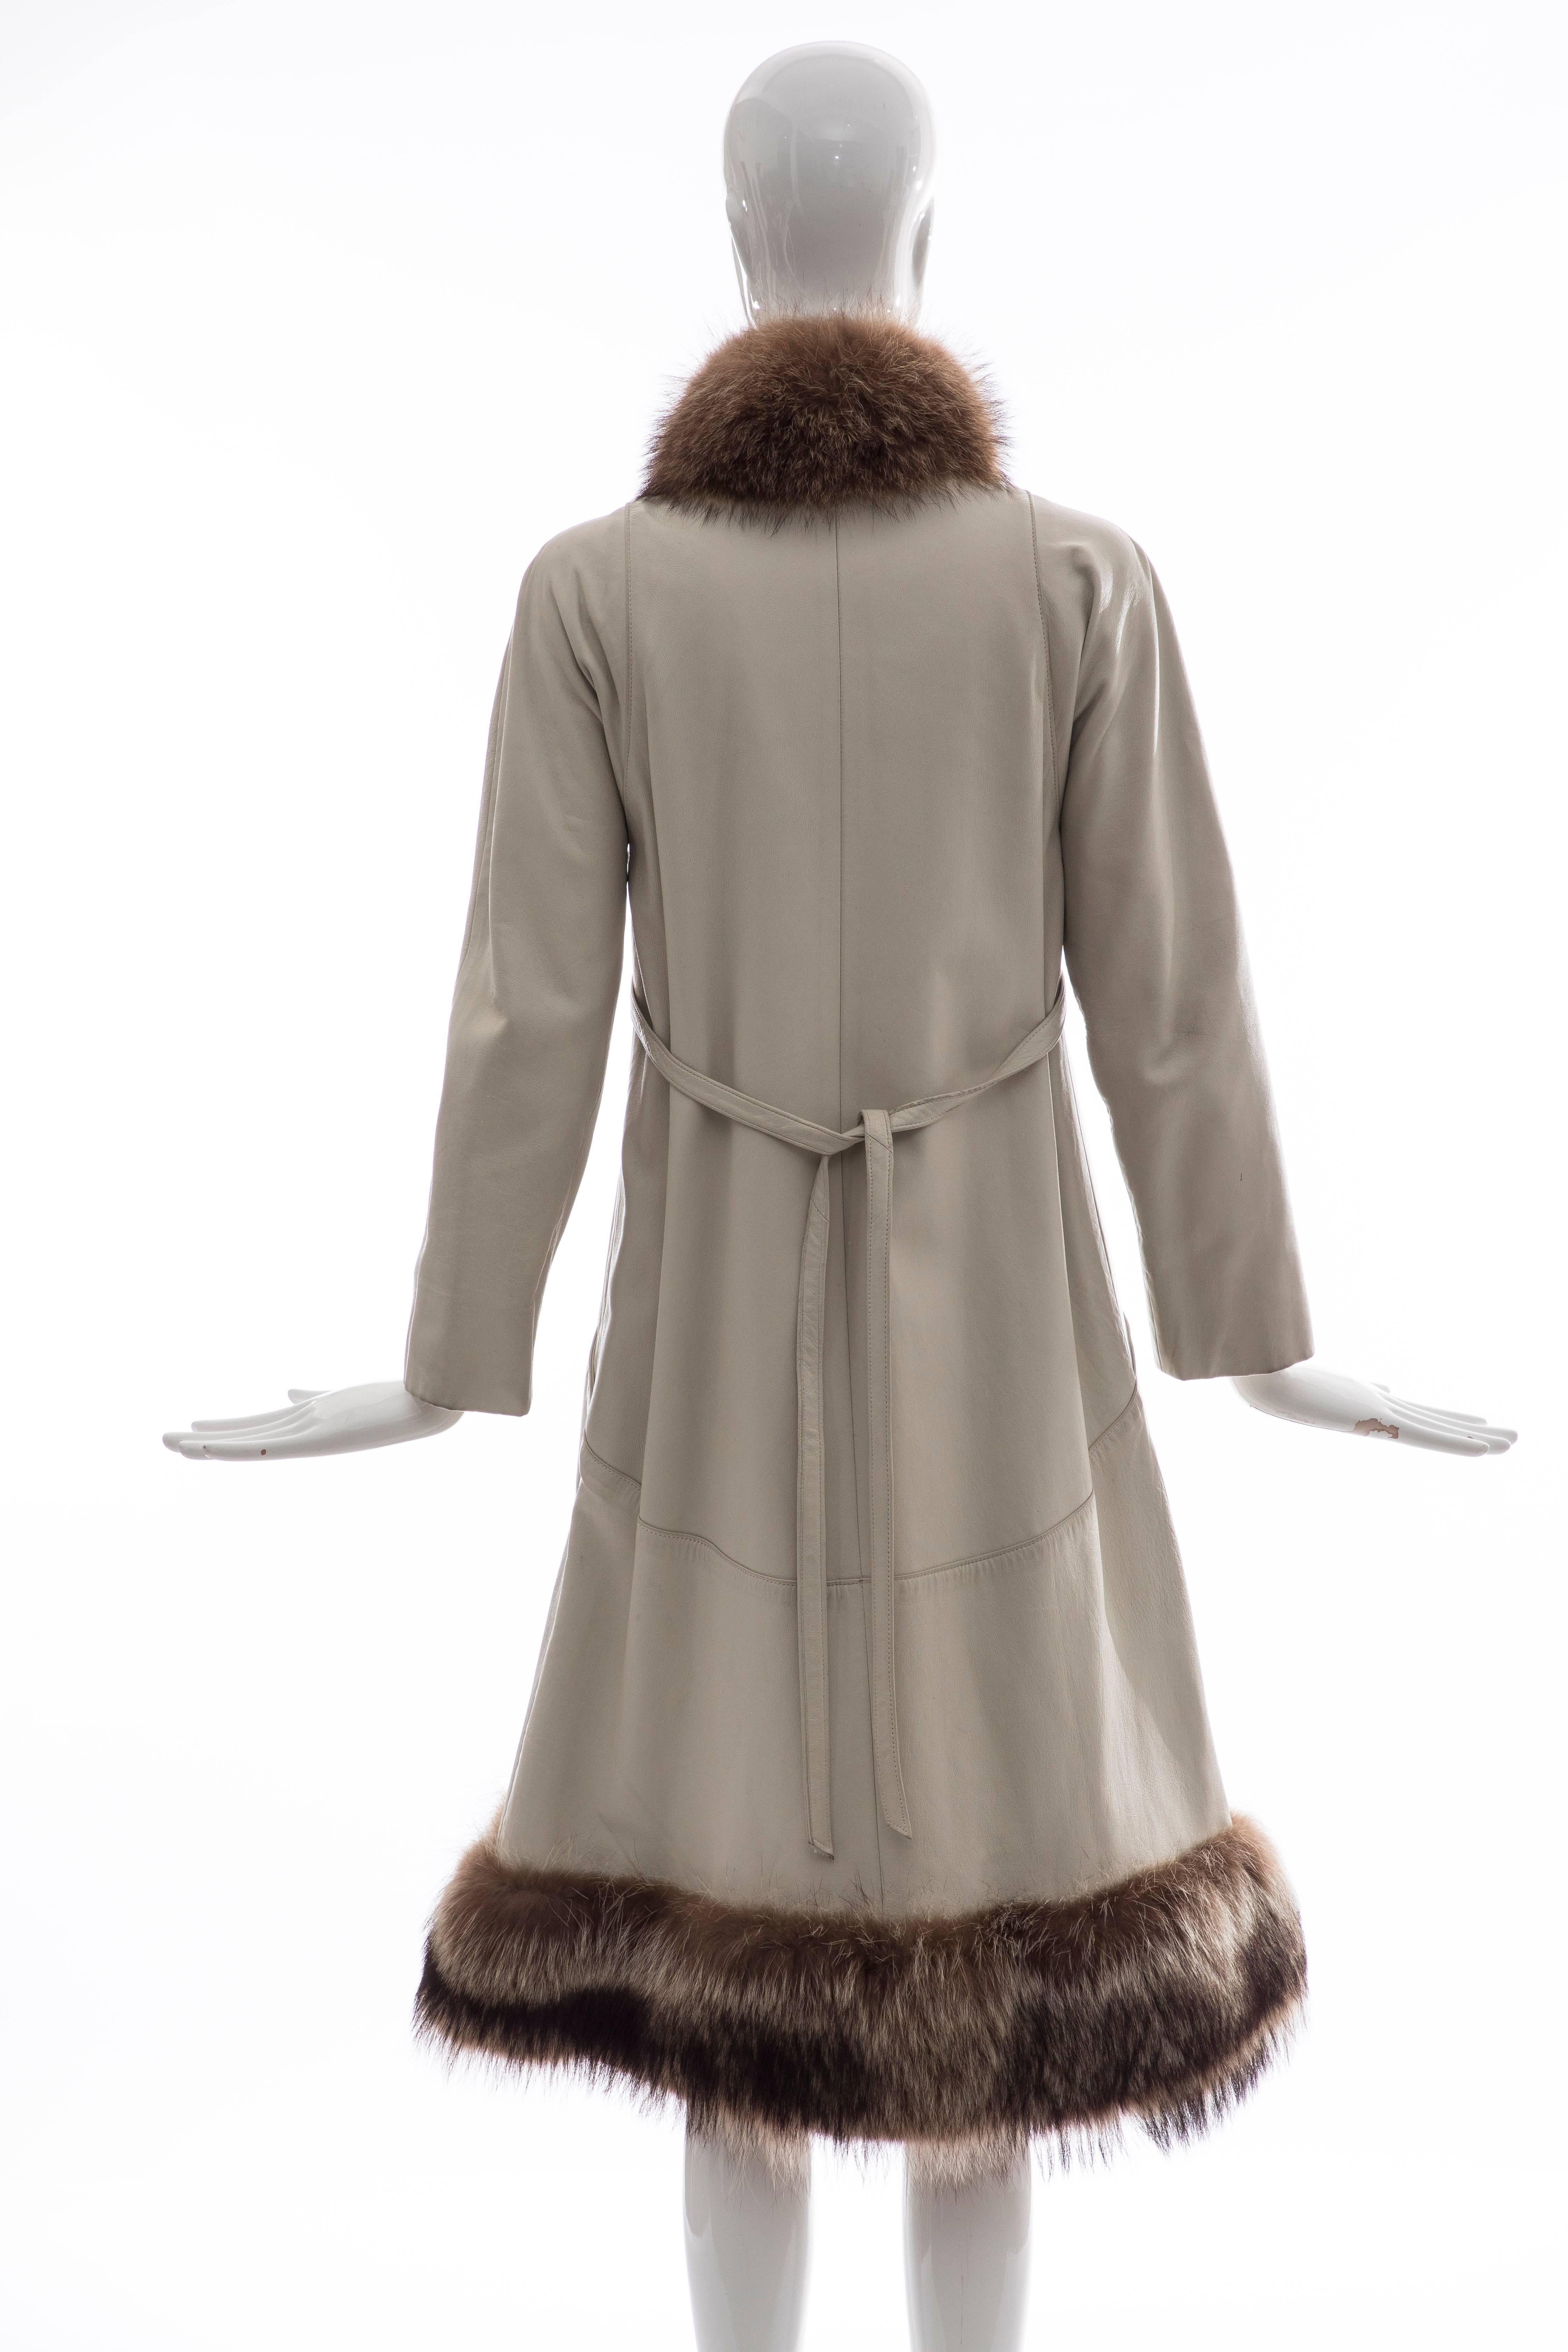 Gray Bonnie Cashin For Sills Leather Coat With Fur Trim, Circa 1960s For Sale